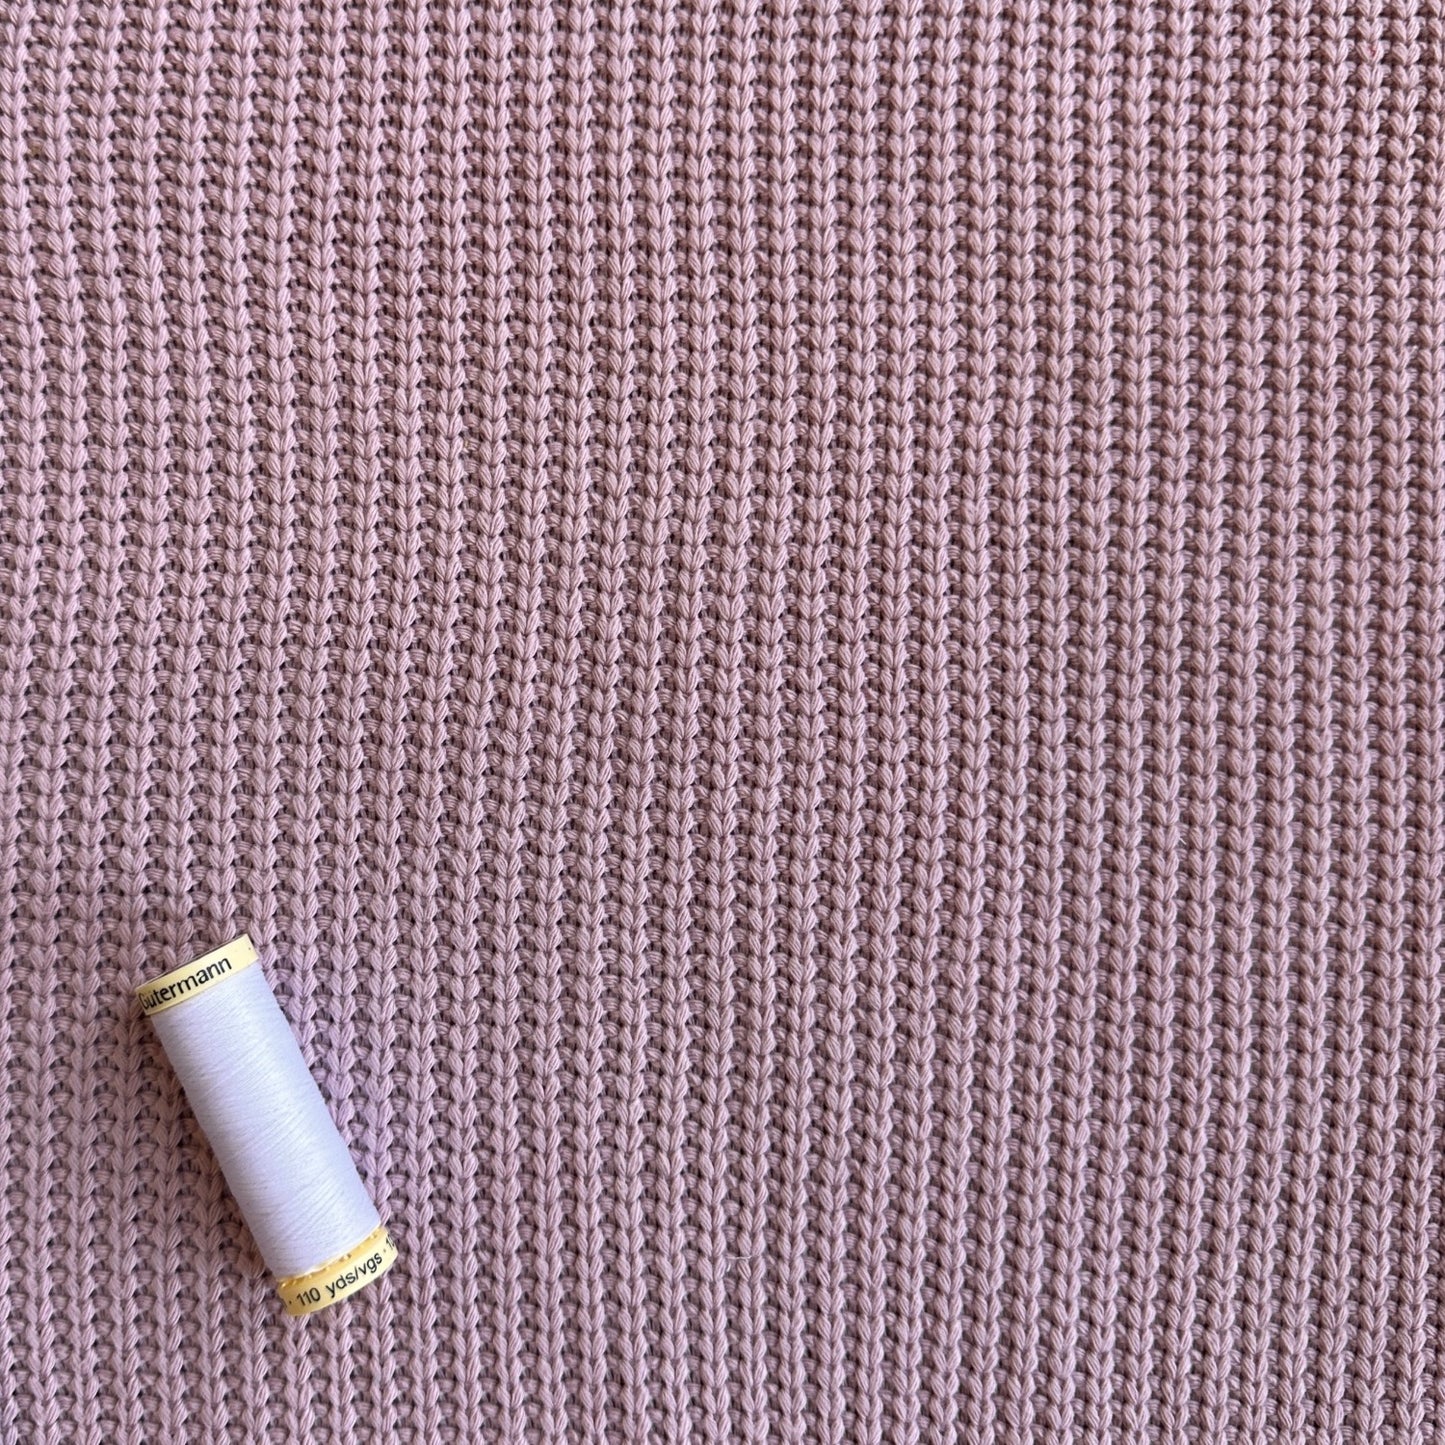 Chunky Fisherman Style Knit Fabric in Old Rose